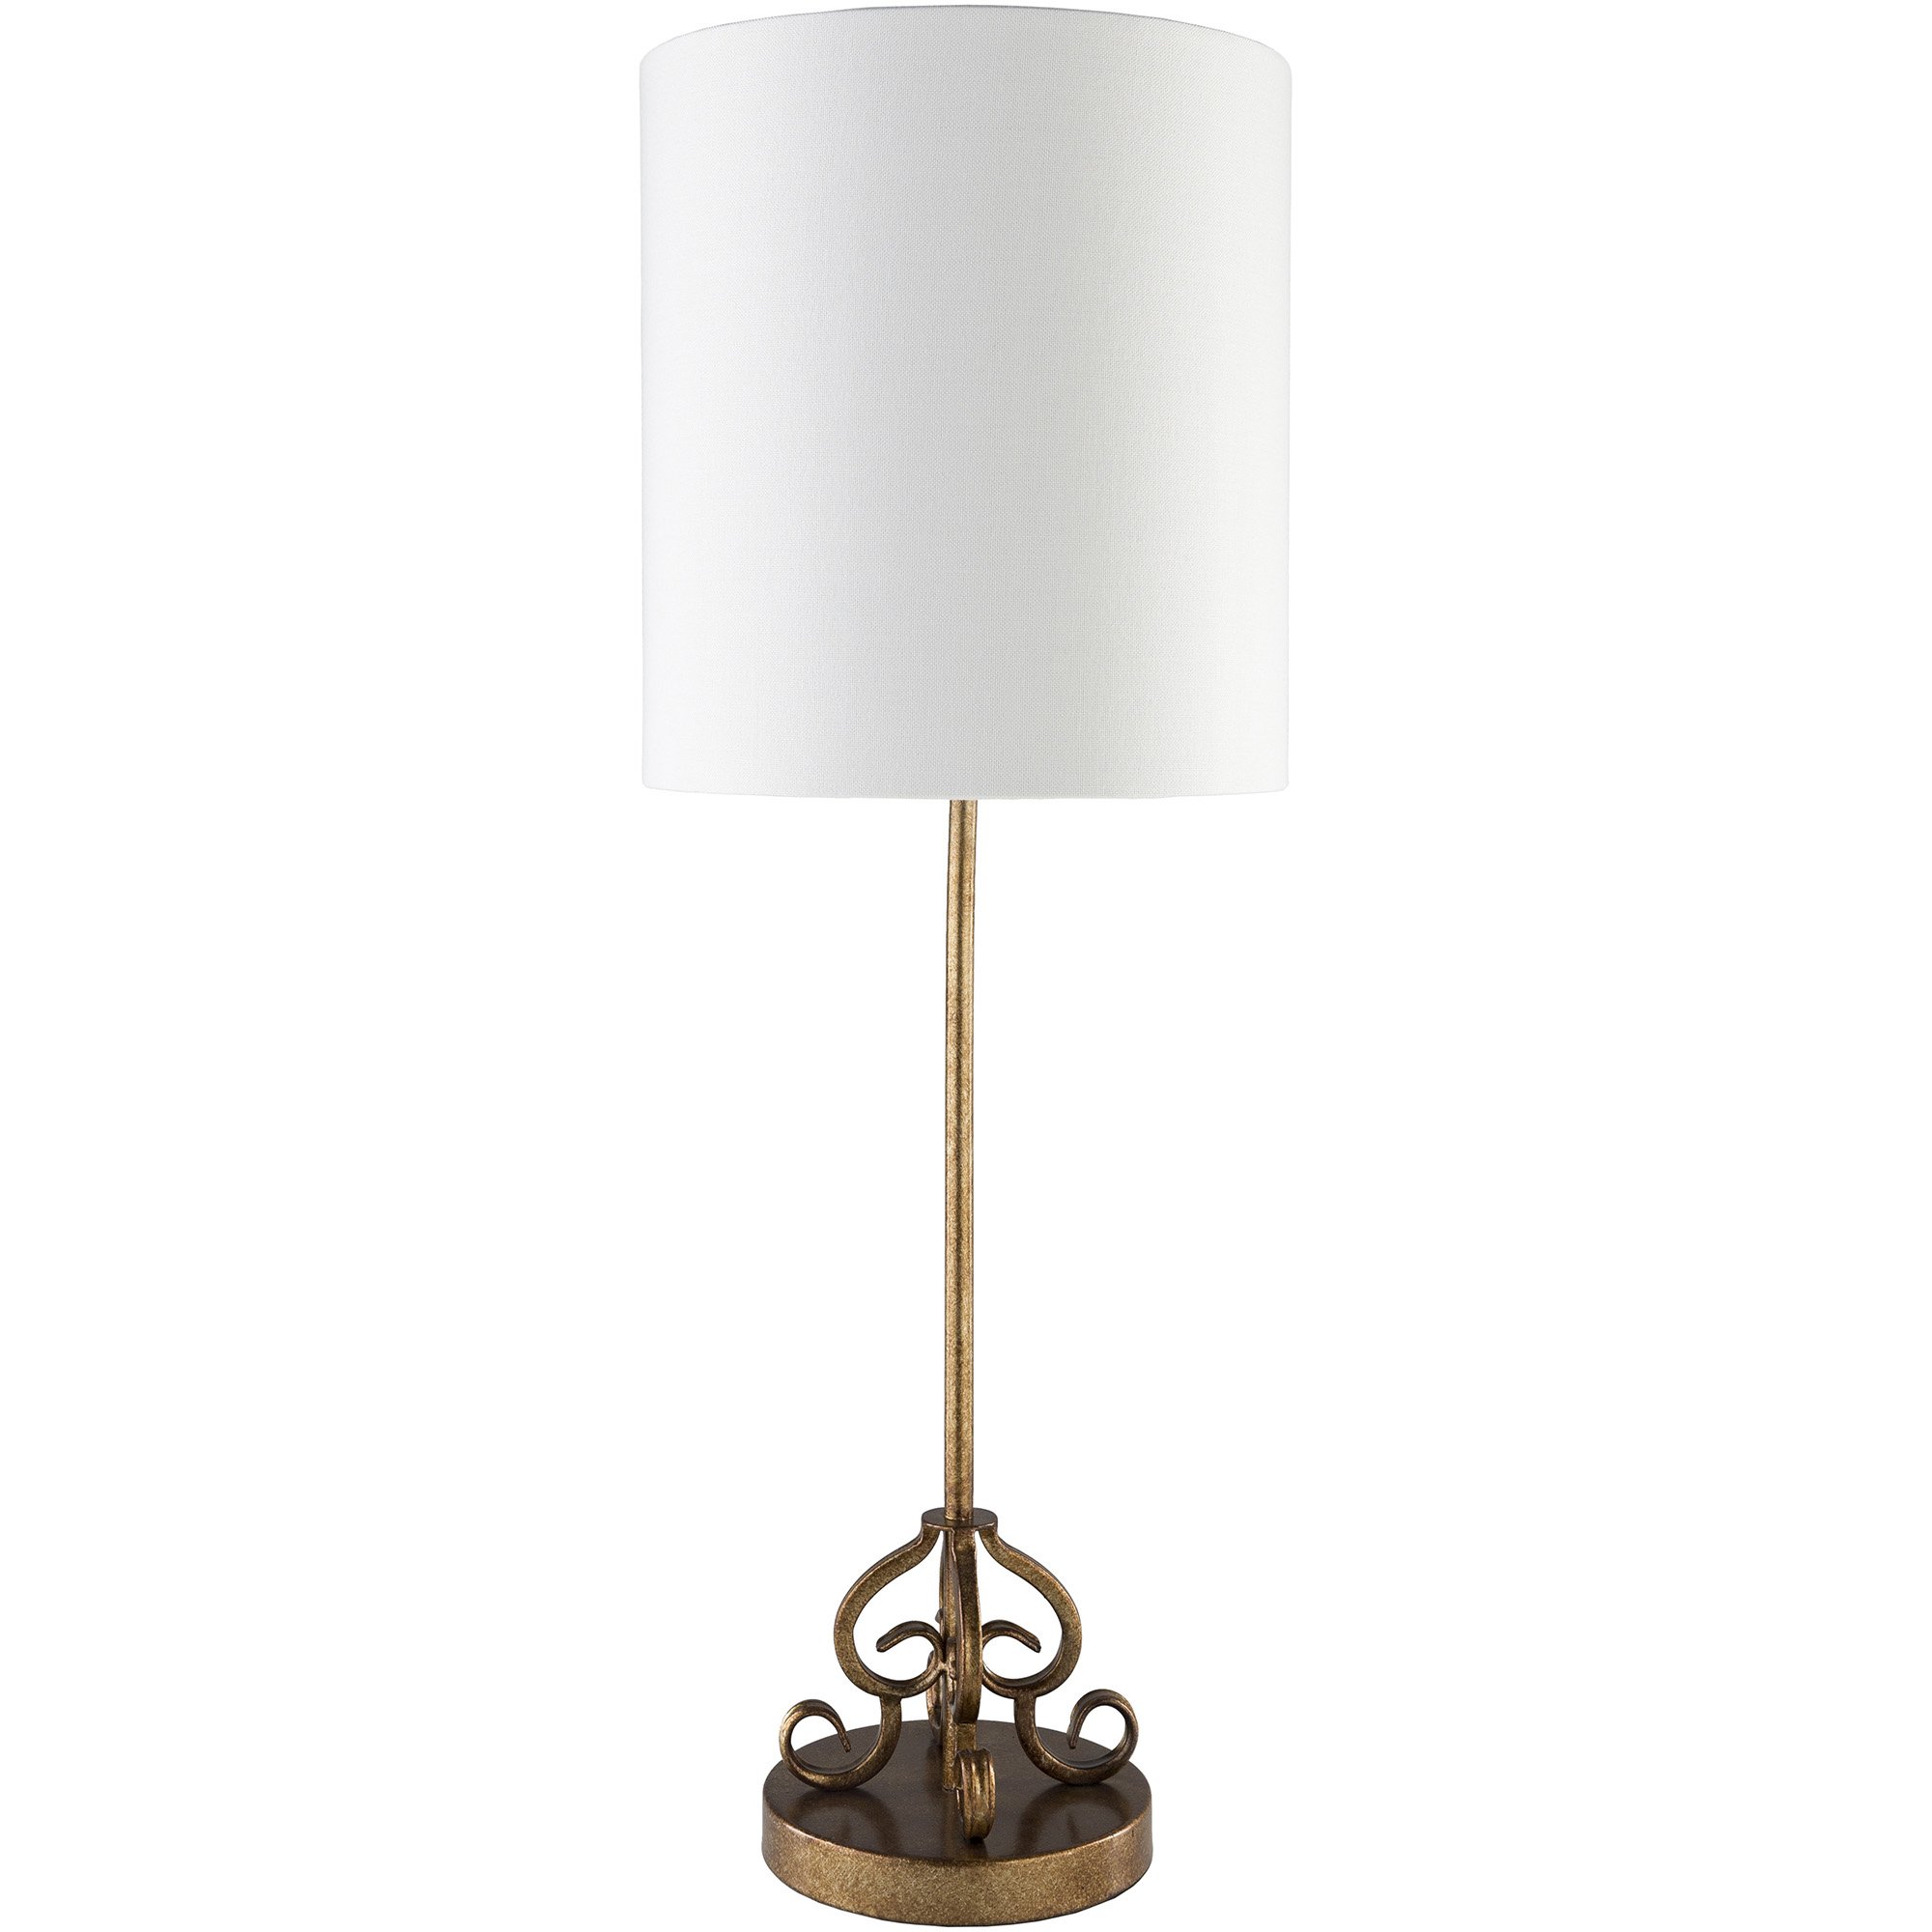 ackerman gold accent table lamp emark tbl modern lamps decorative nesting tables toronto thin cabinet pier west elm tripod floor fruit cocktail small square outdoor tablette prix